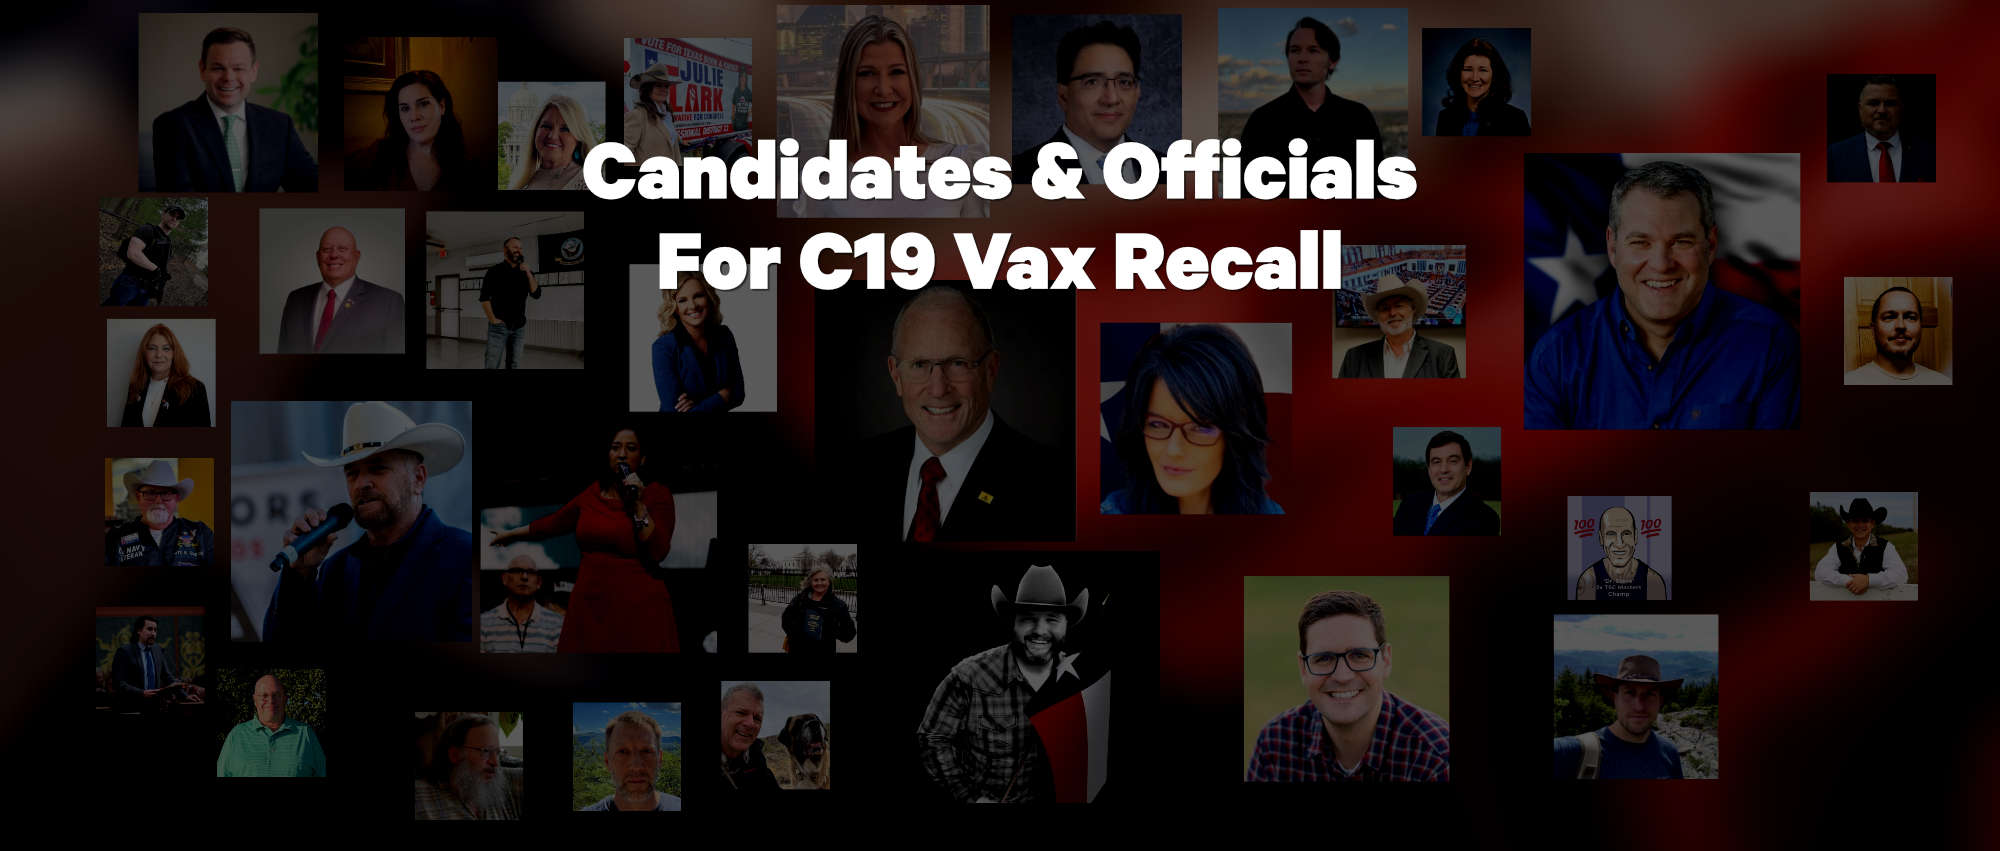 Candidates_Against_Vax-HiText